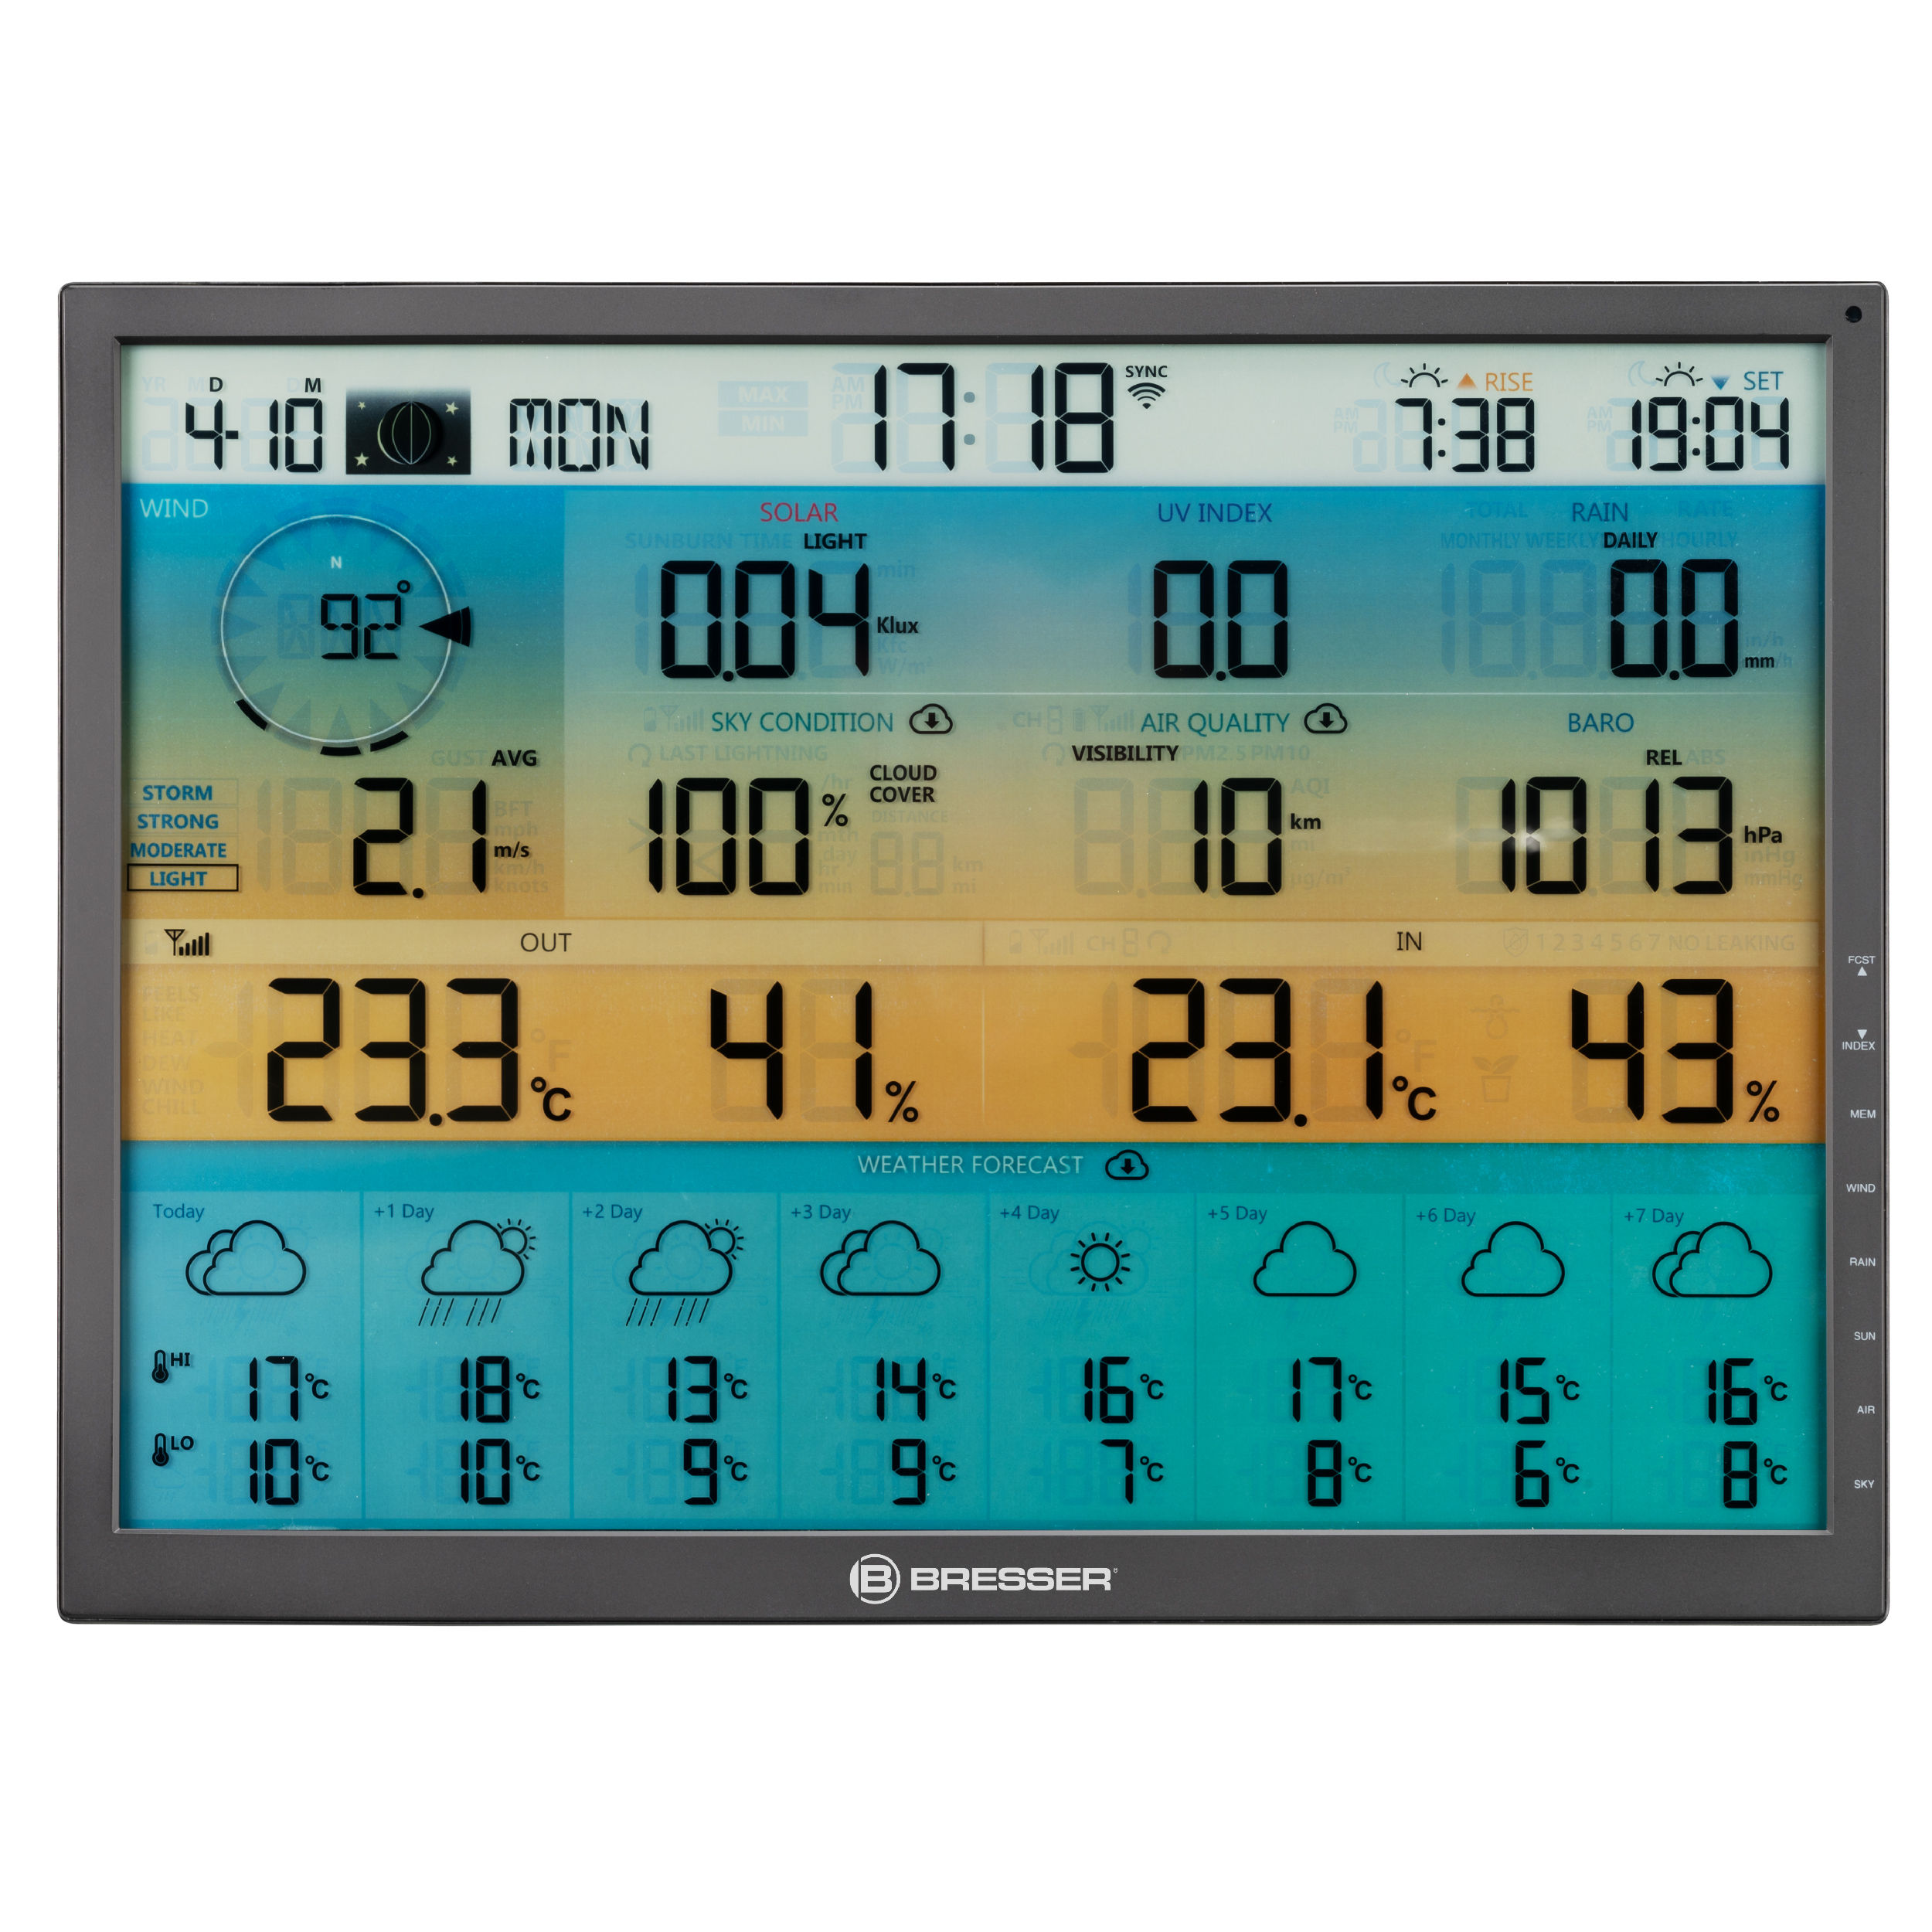 BRESSER additional/replacement base station for the 7003230 8-day 4CAST XL Wi-Fi Weather Station